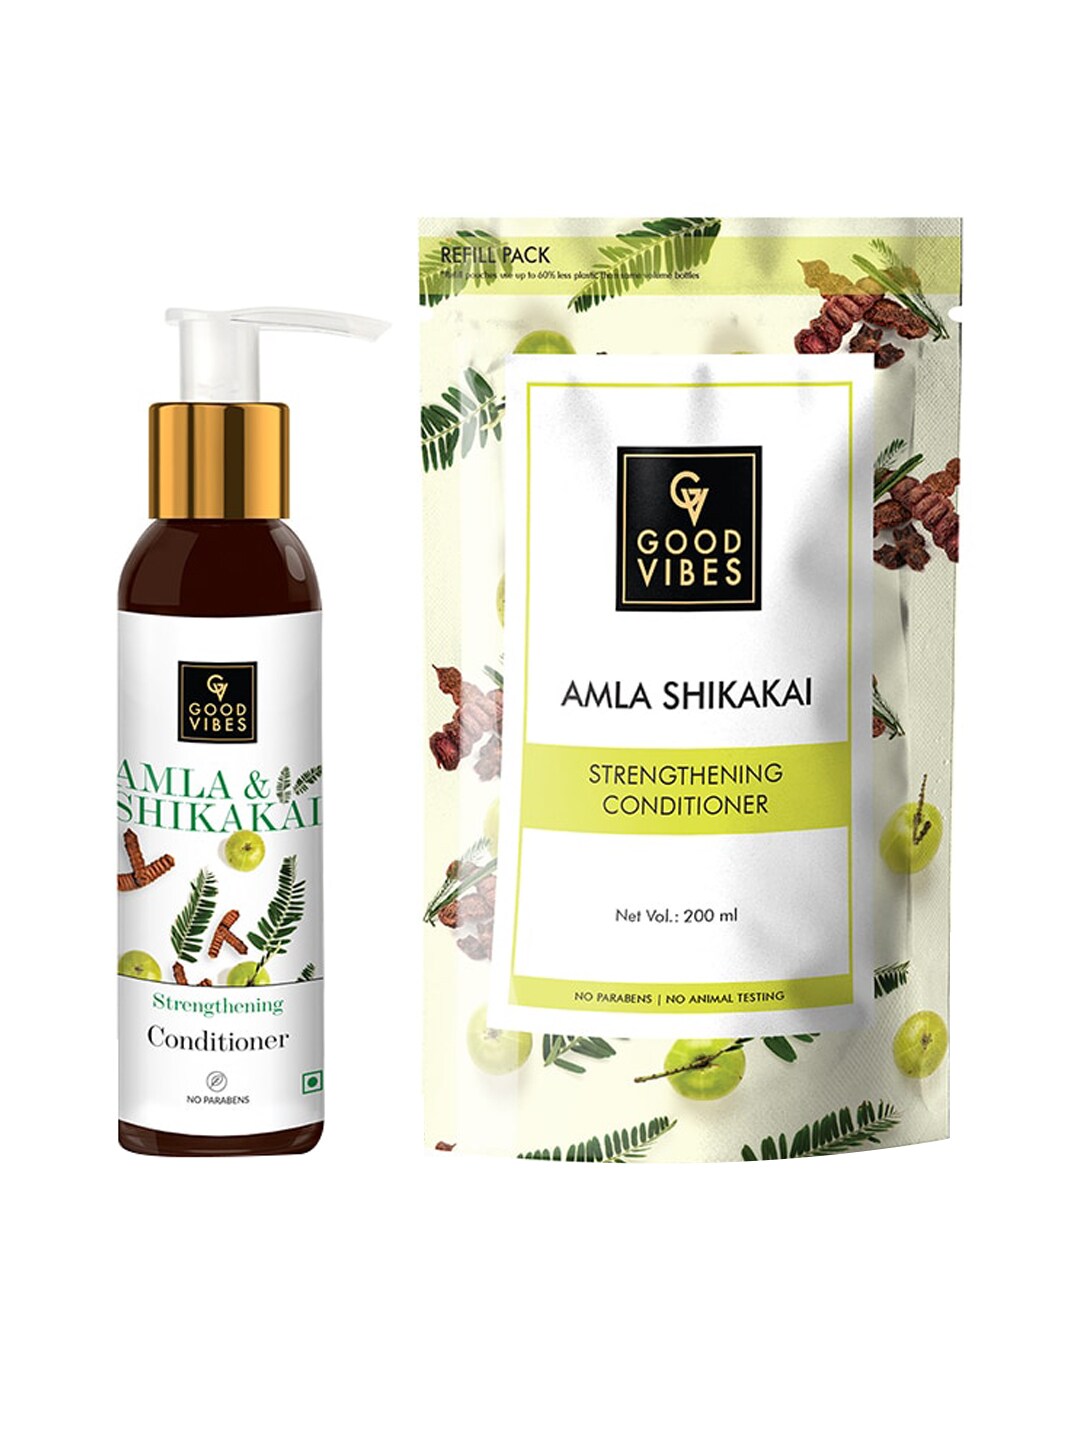 Good Vibes Set Of 2 Amla Shikakai Hair Strengthening Conditioner Bottle & Pouch 320ml Price in India